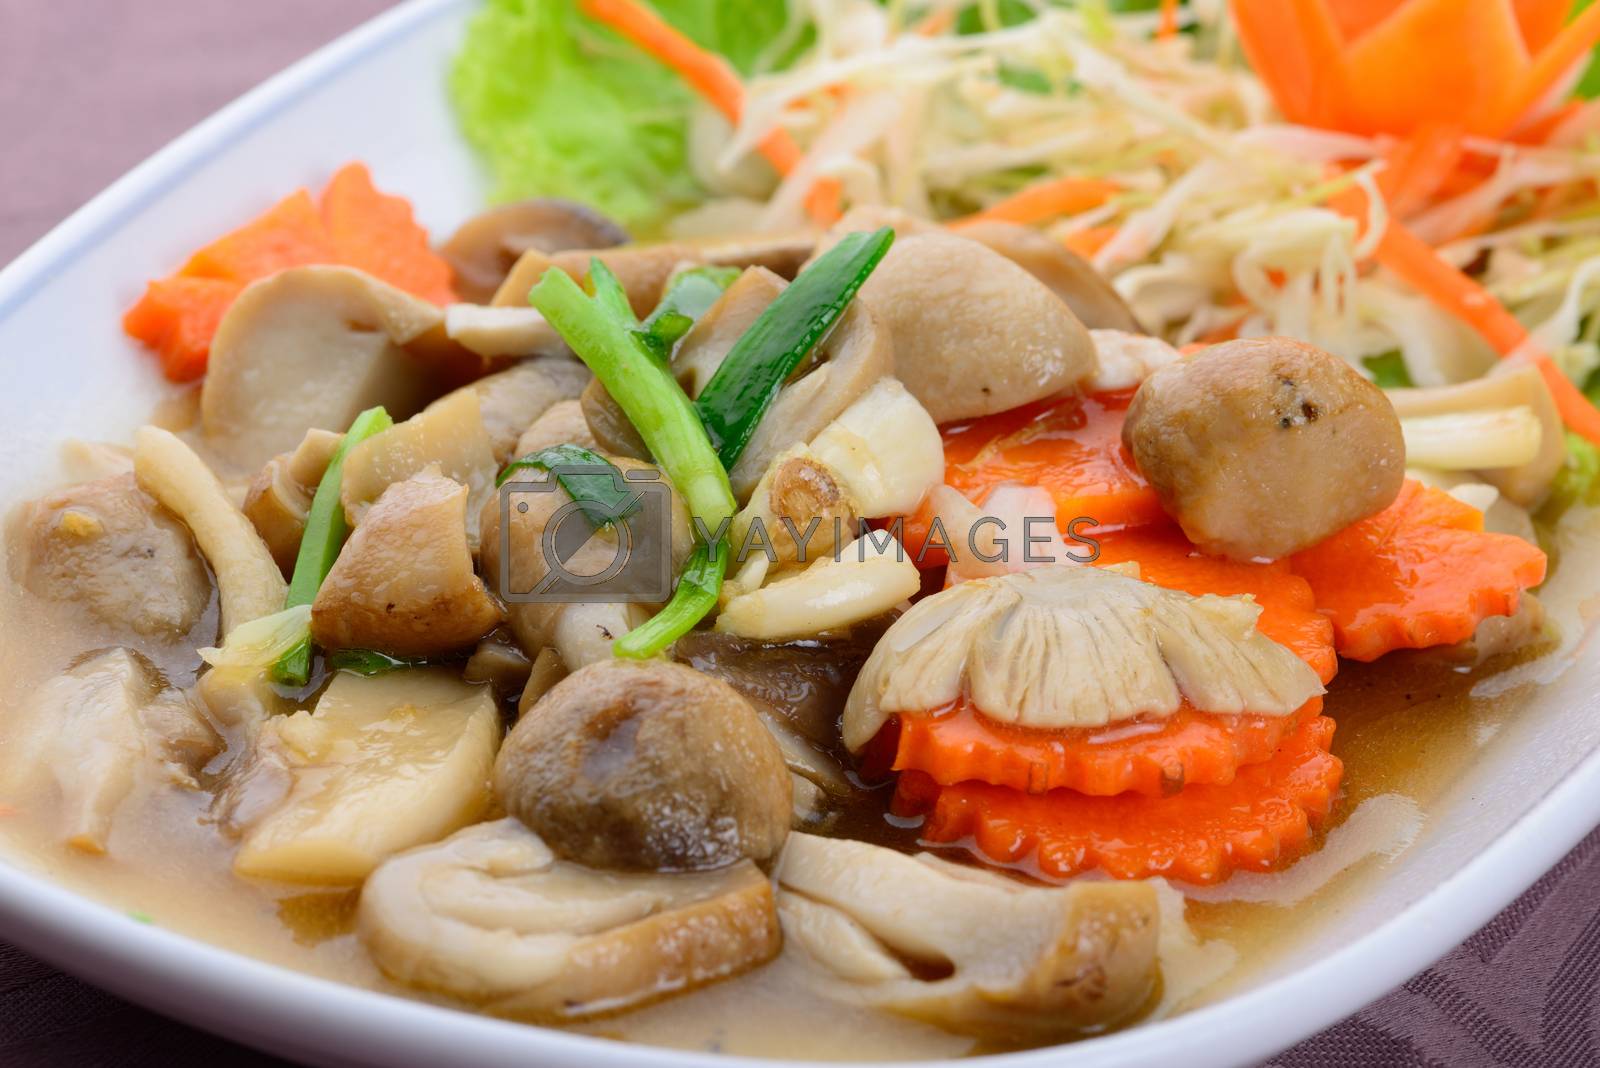 Royalty free image of Fried mushroom in oyster sauce by numskyman